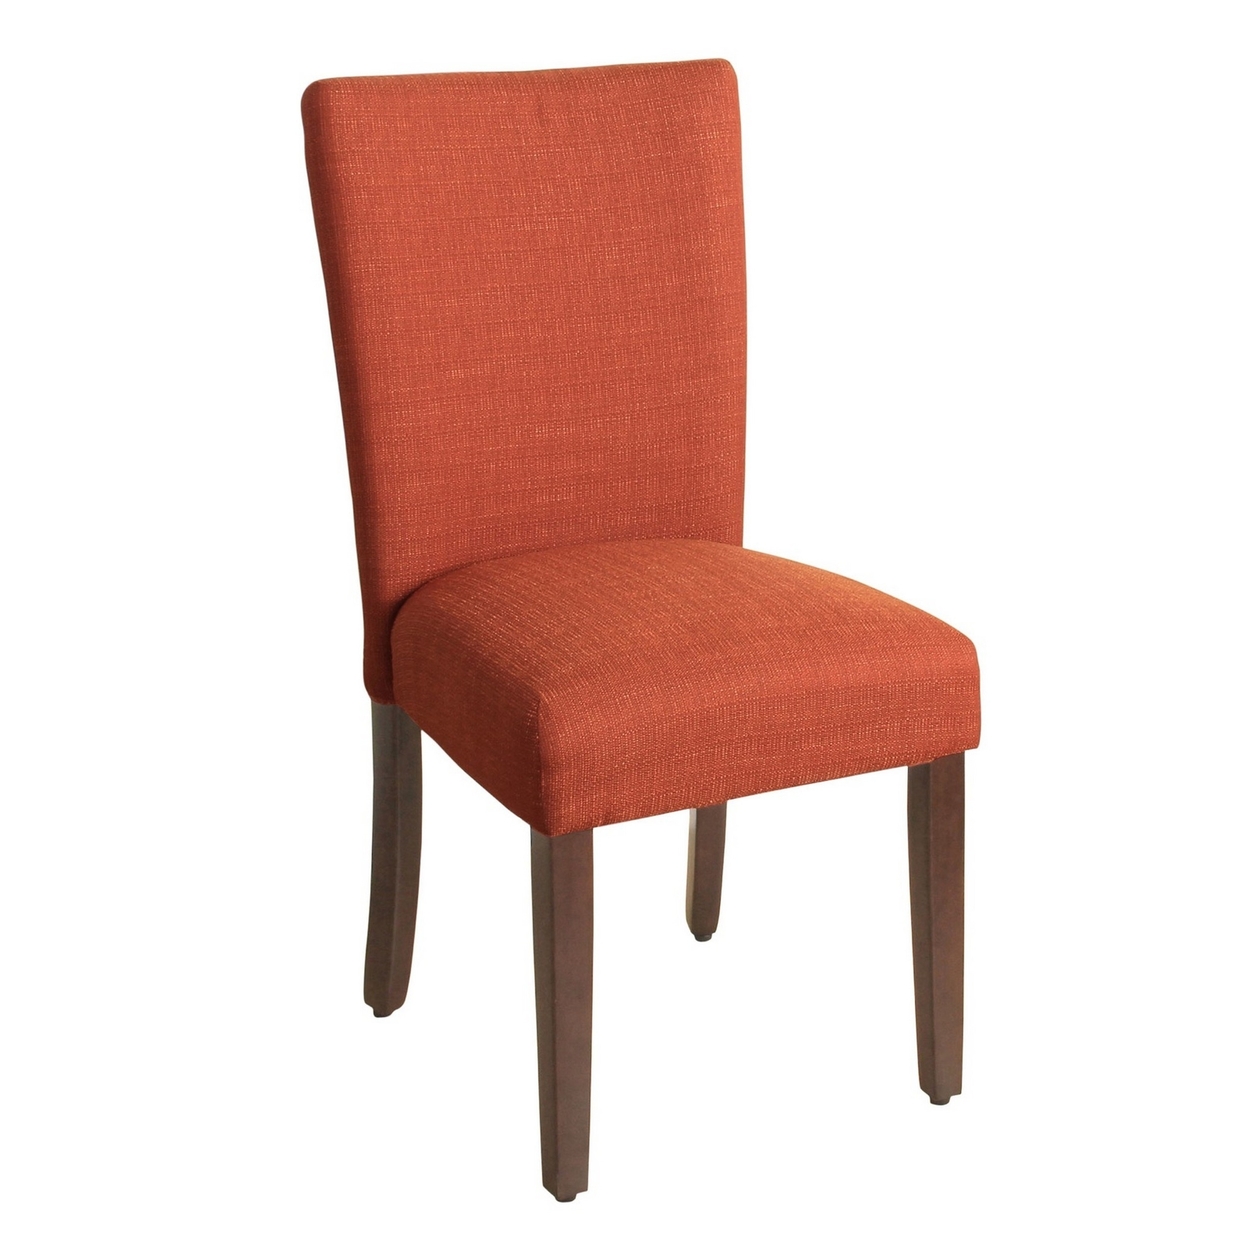 Fabric Upholstered Wooden Armless Parson Dining Chair, Orange And Brown- Saltoro Sherpi